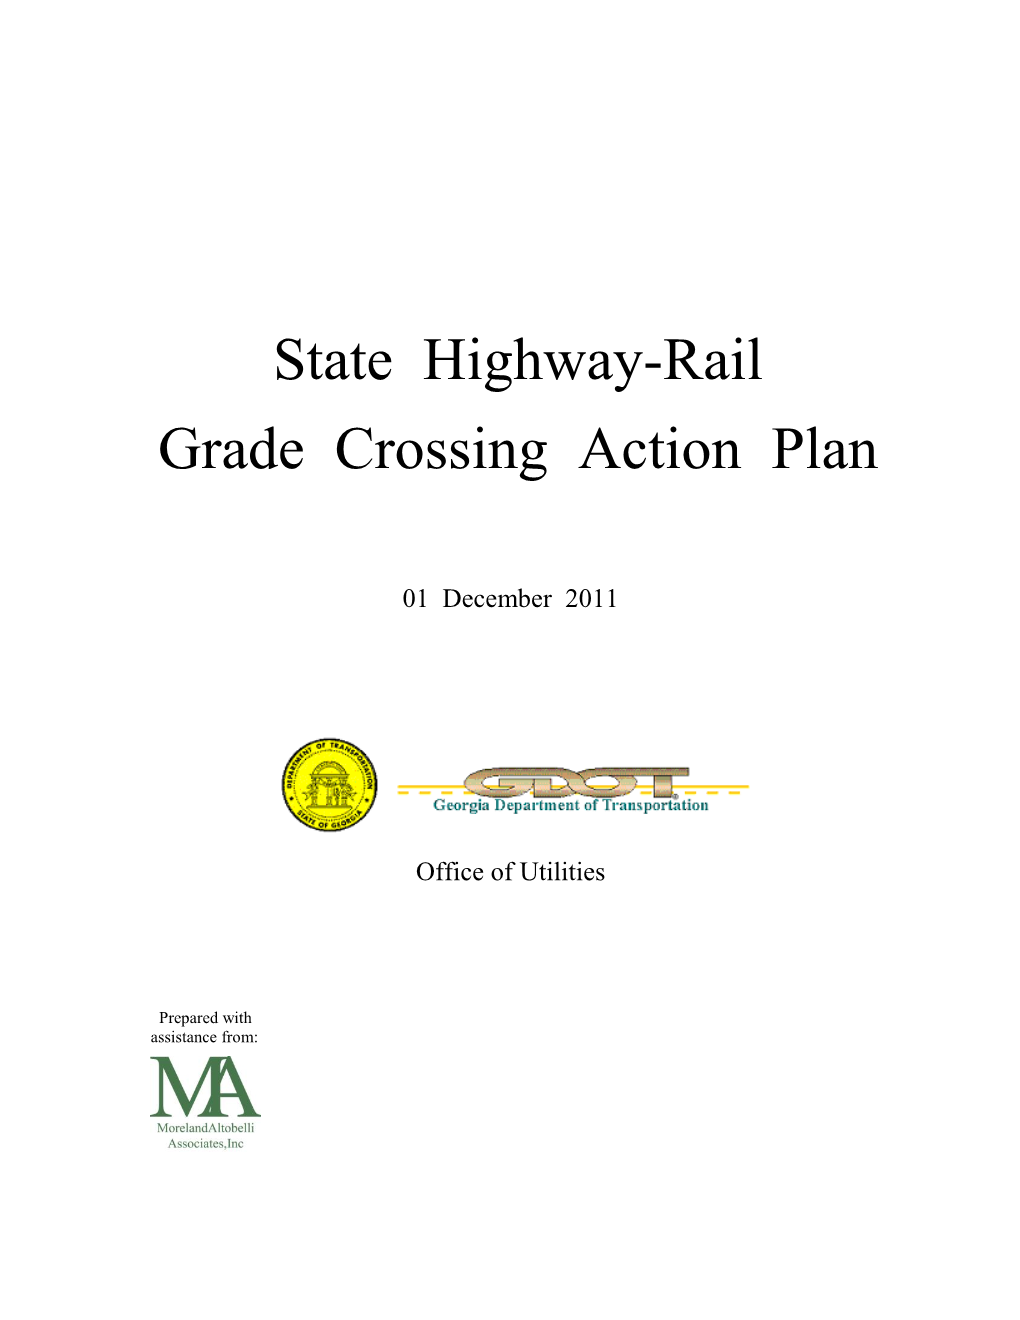 State Highway-Rail Grade Crossing Action Plan